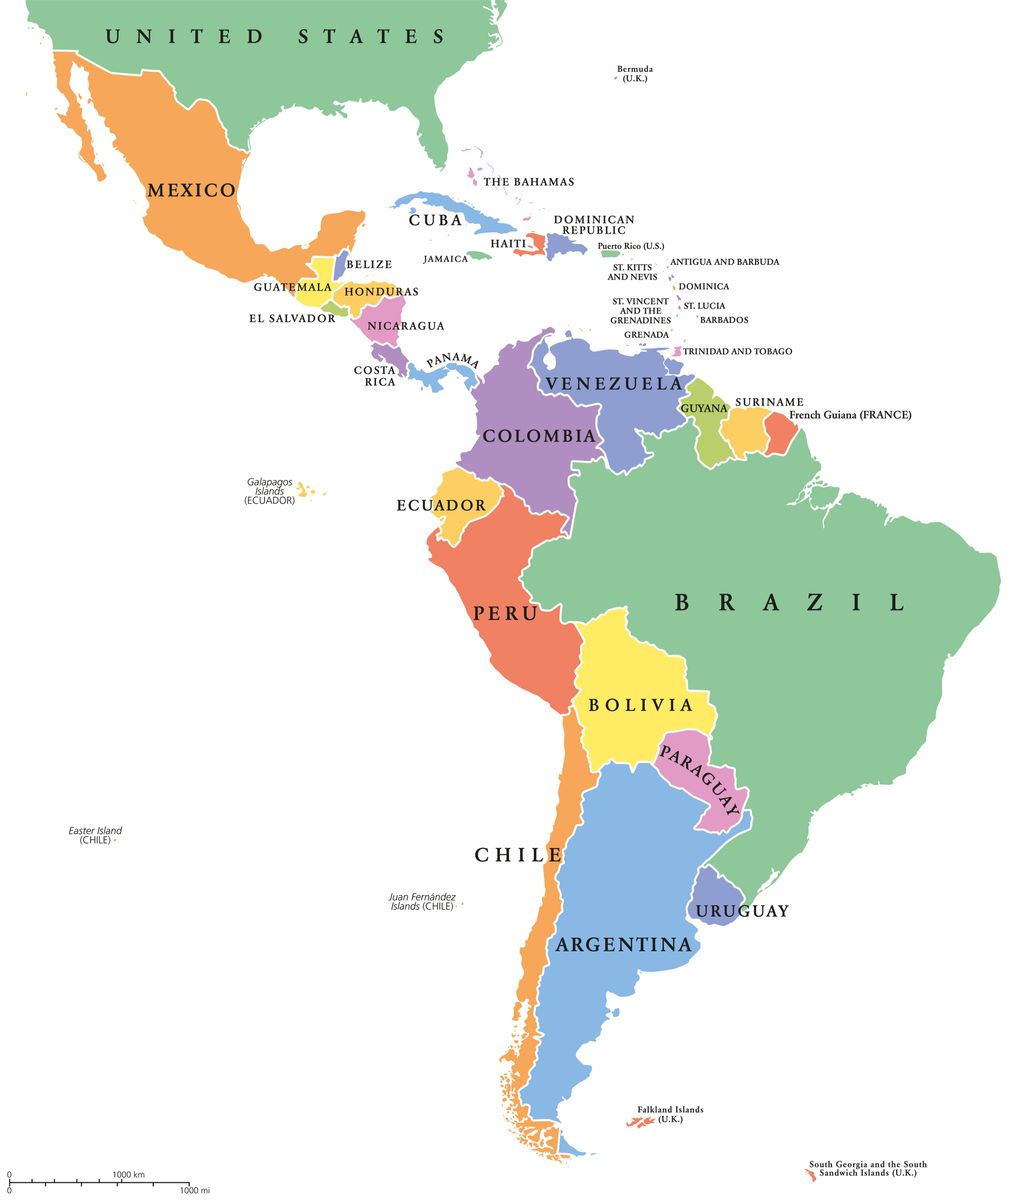 Political map of Latin America and Caribbean